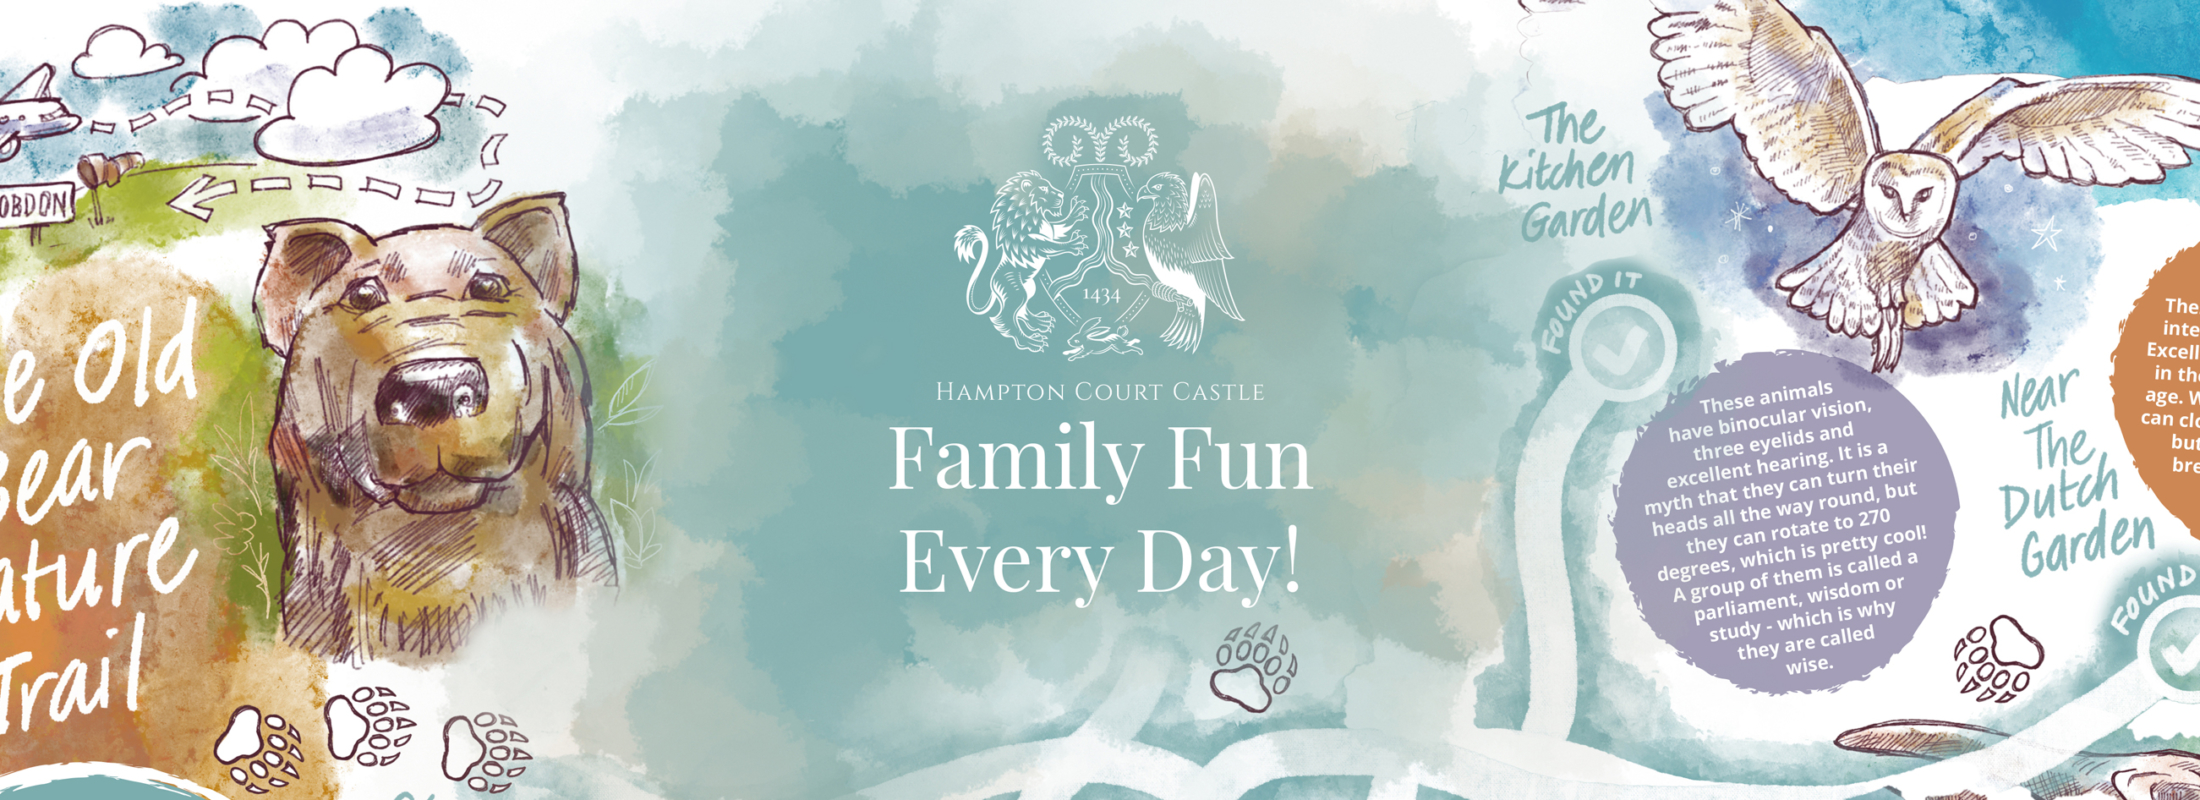 Family fun nature trail day out at Hampton Court Castle hereford